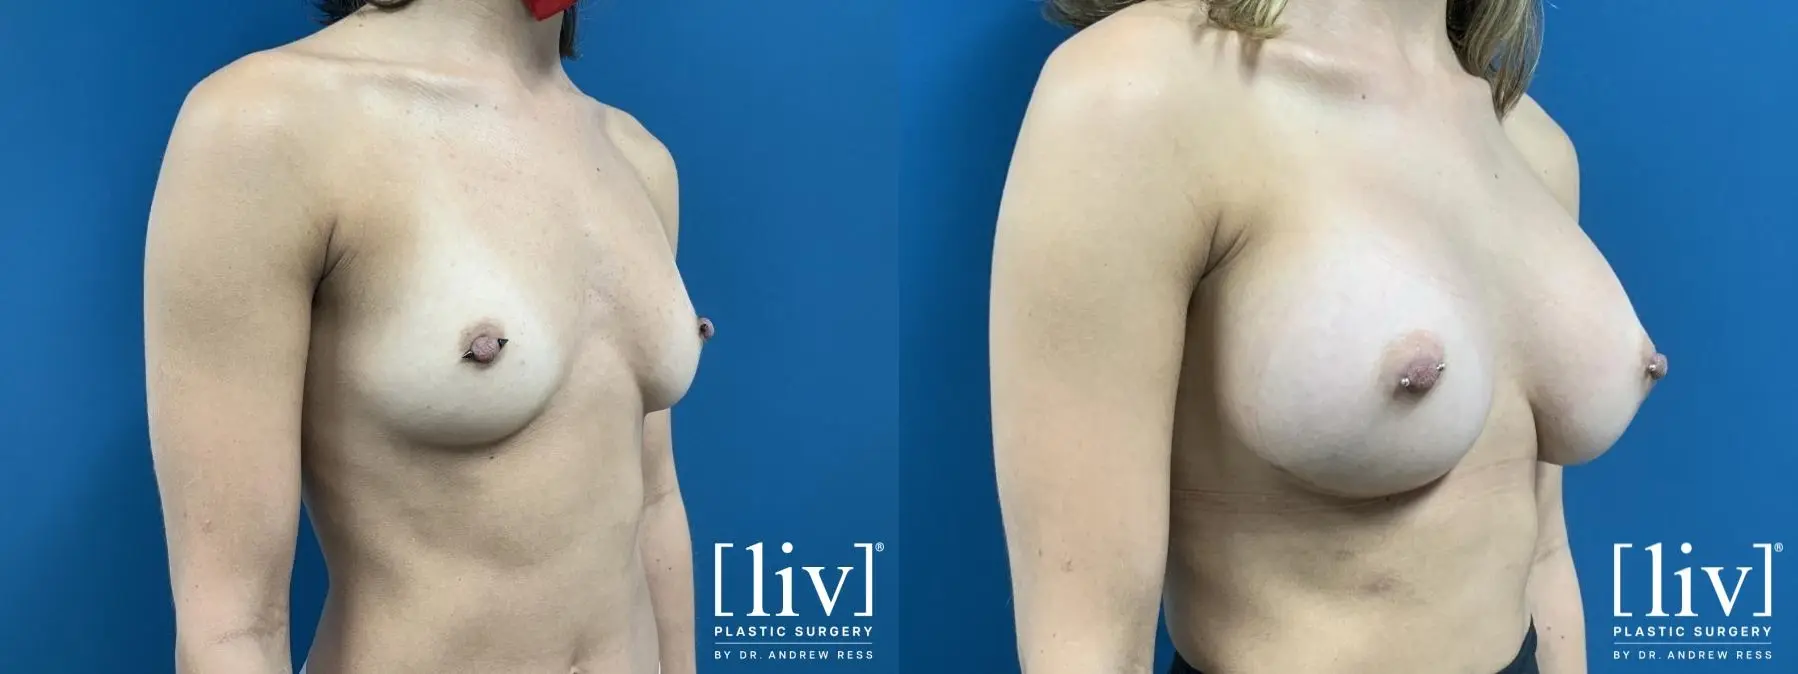 Breast Augmentation: Patient 1 - Before and After 4